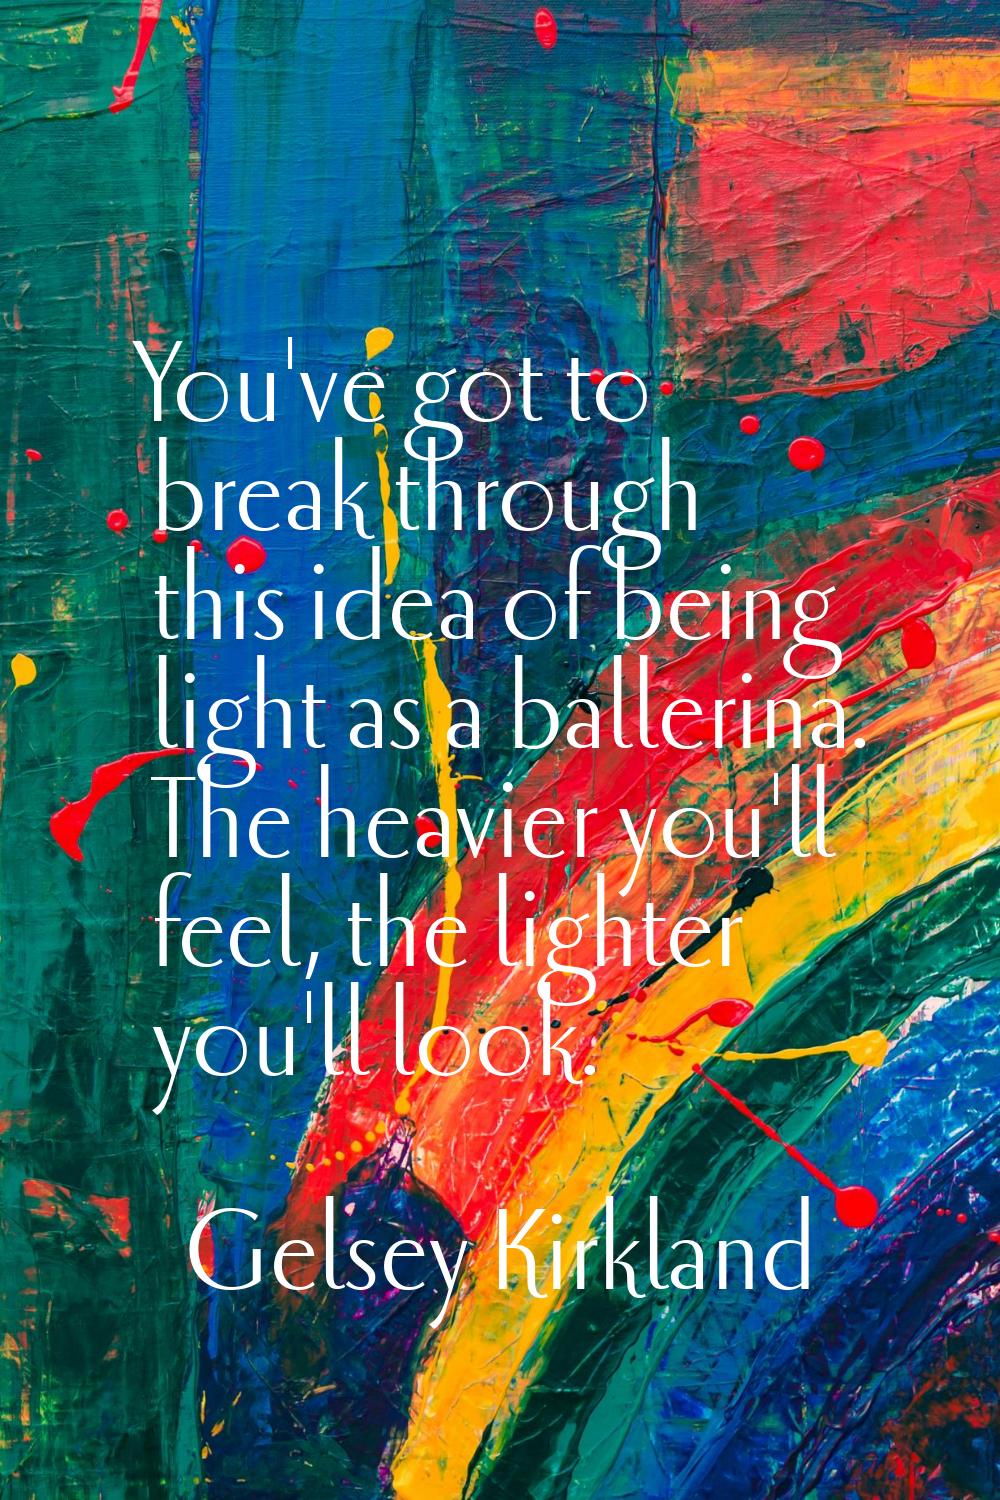 You've got to break through this idea of being light as a ballerina. The heavier you'll feel, the l